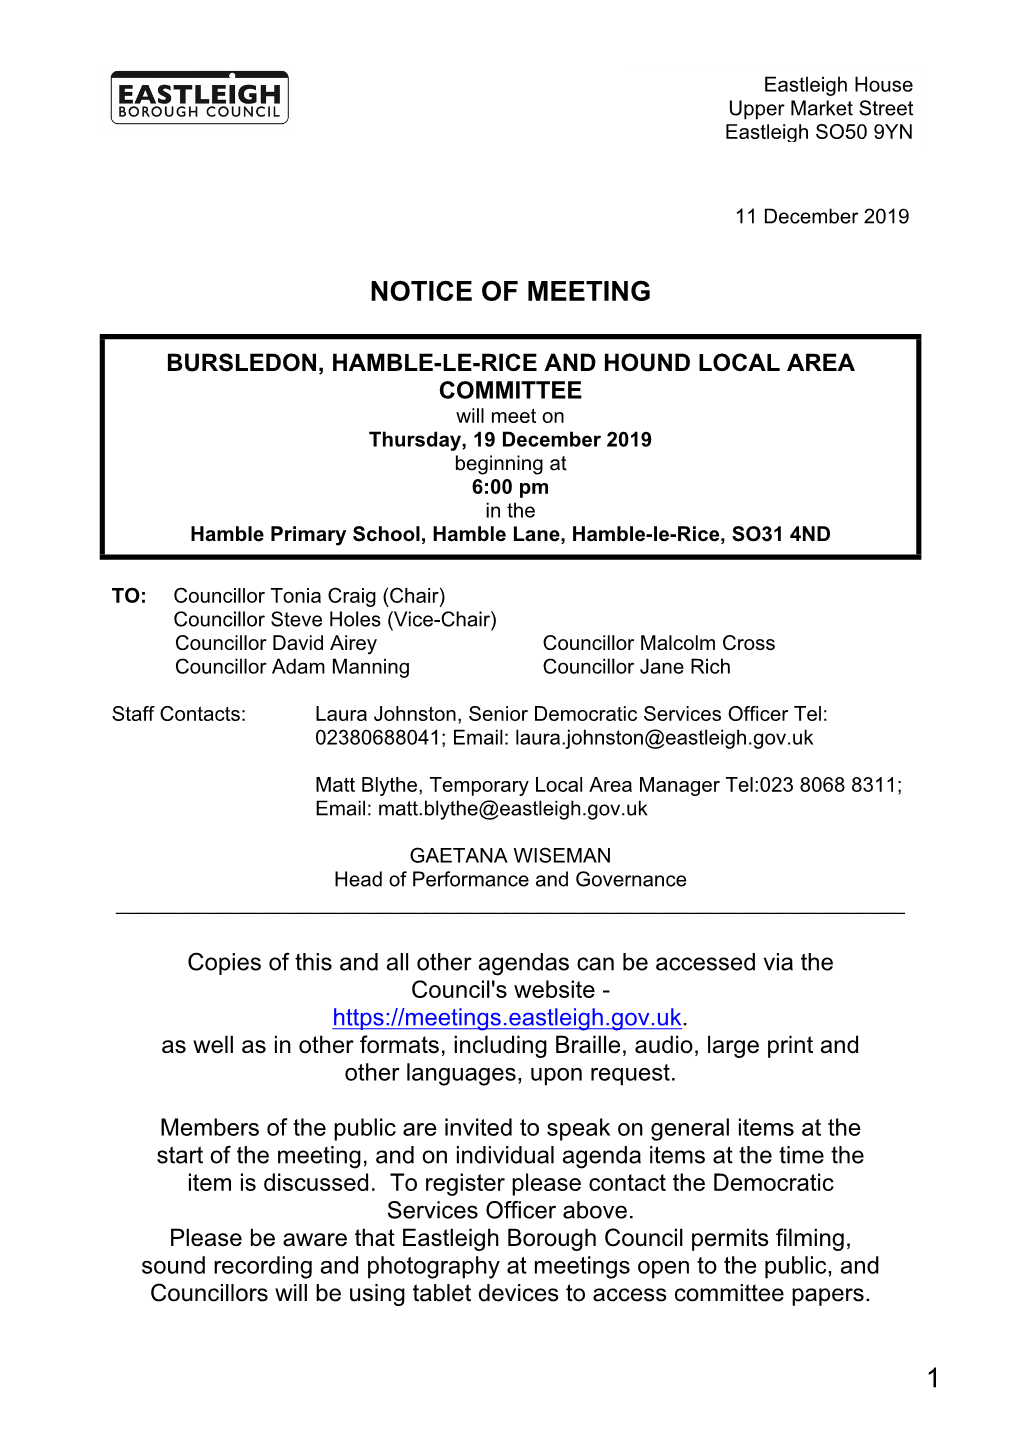 (Public Pack)Agenda Document for Bursledon, Hamble-Le-Rice and Hound Local Area Committee, 19/12/2019 18:00